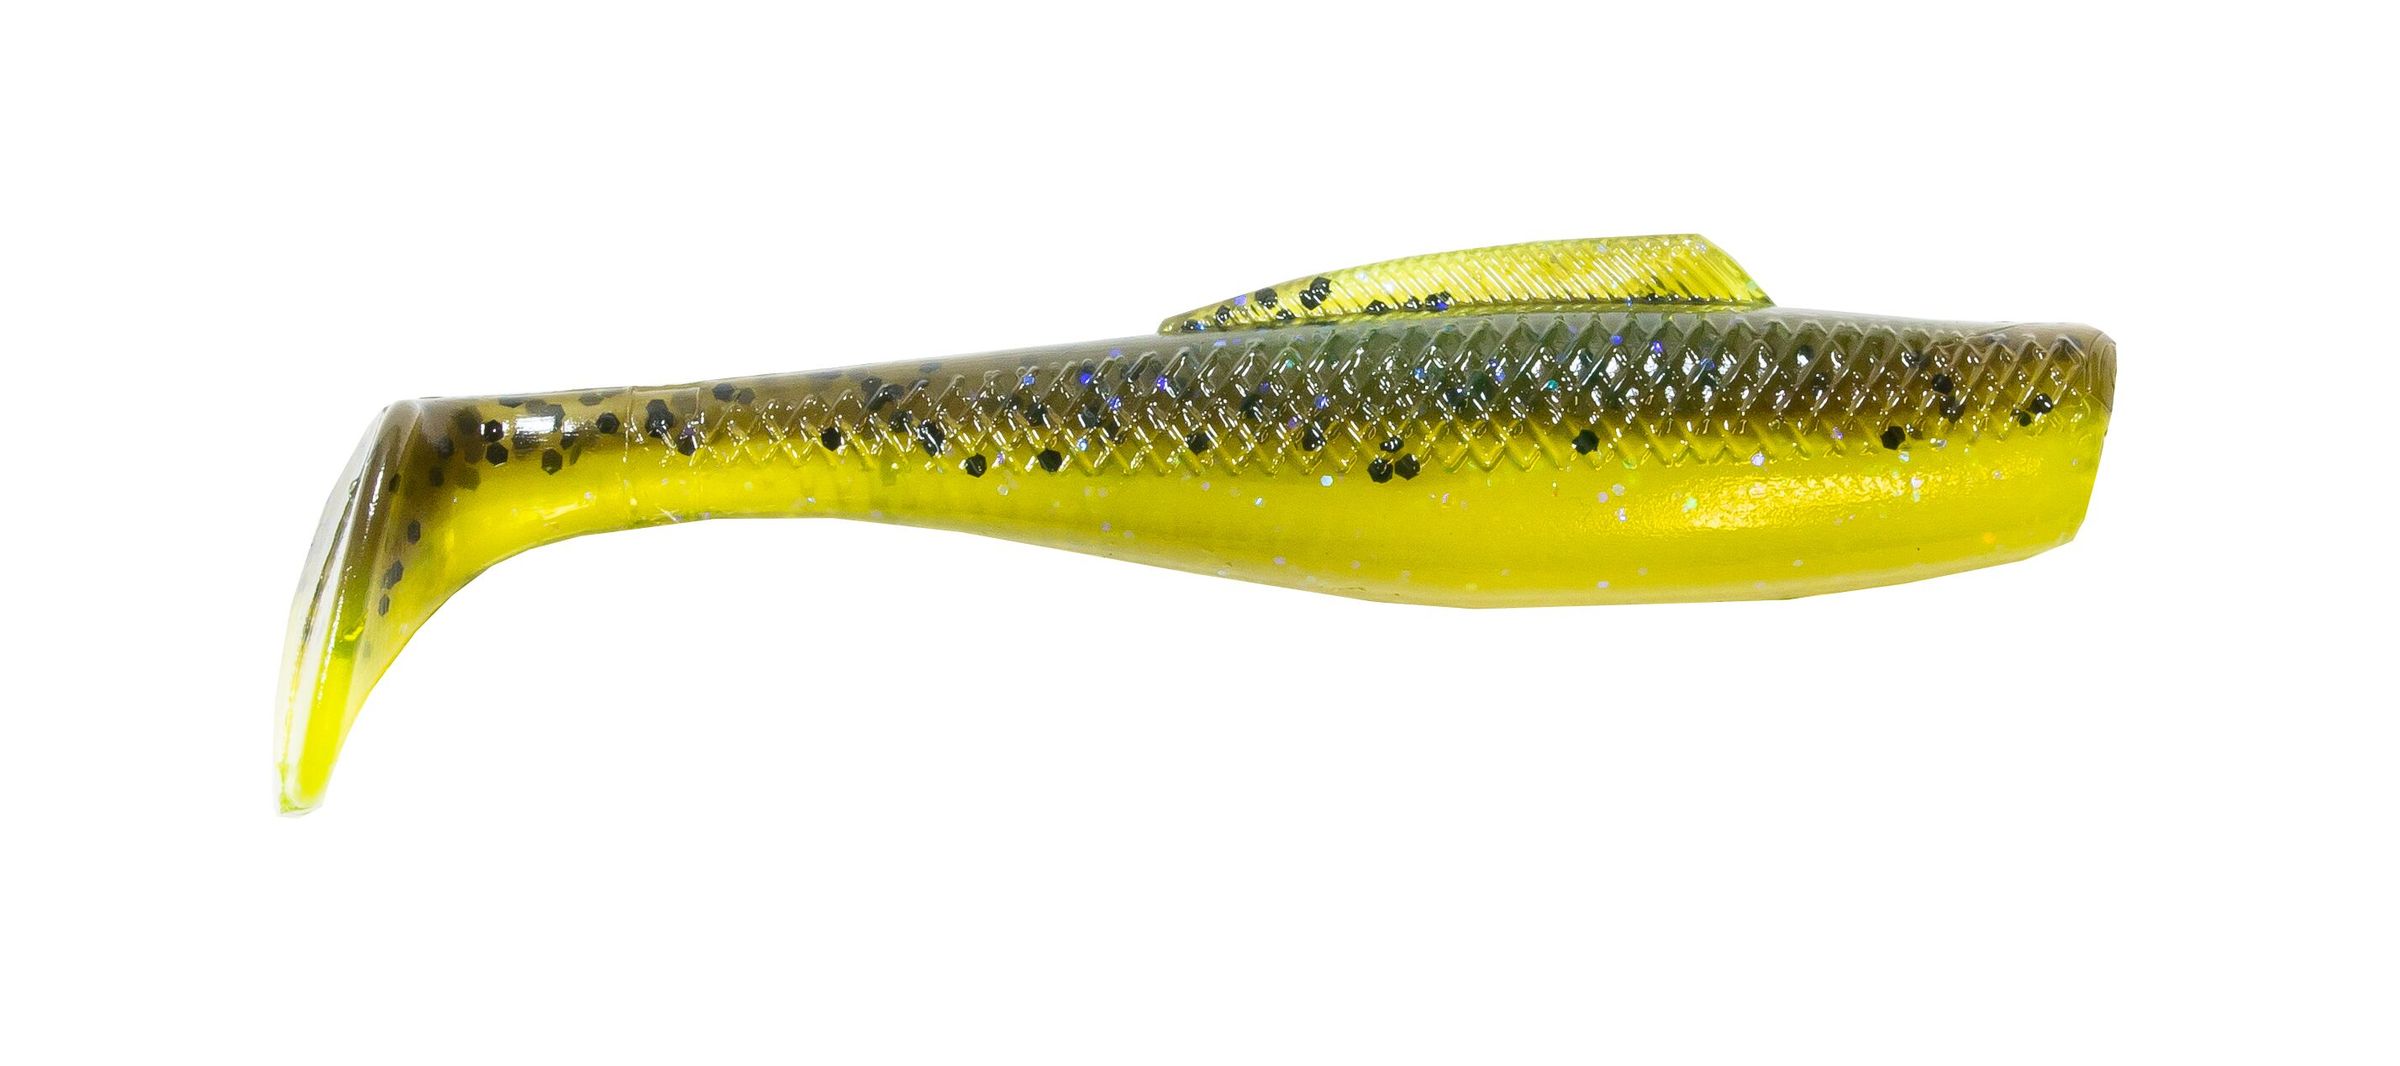 Zman Minnowz™ 3inch Soft Baits, 6/pack 10x Tough Elaztech® - Cabral  Outdoors at Rs 457, Udupi